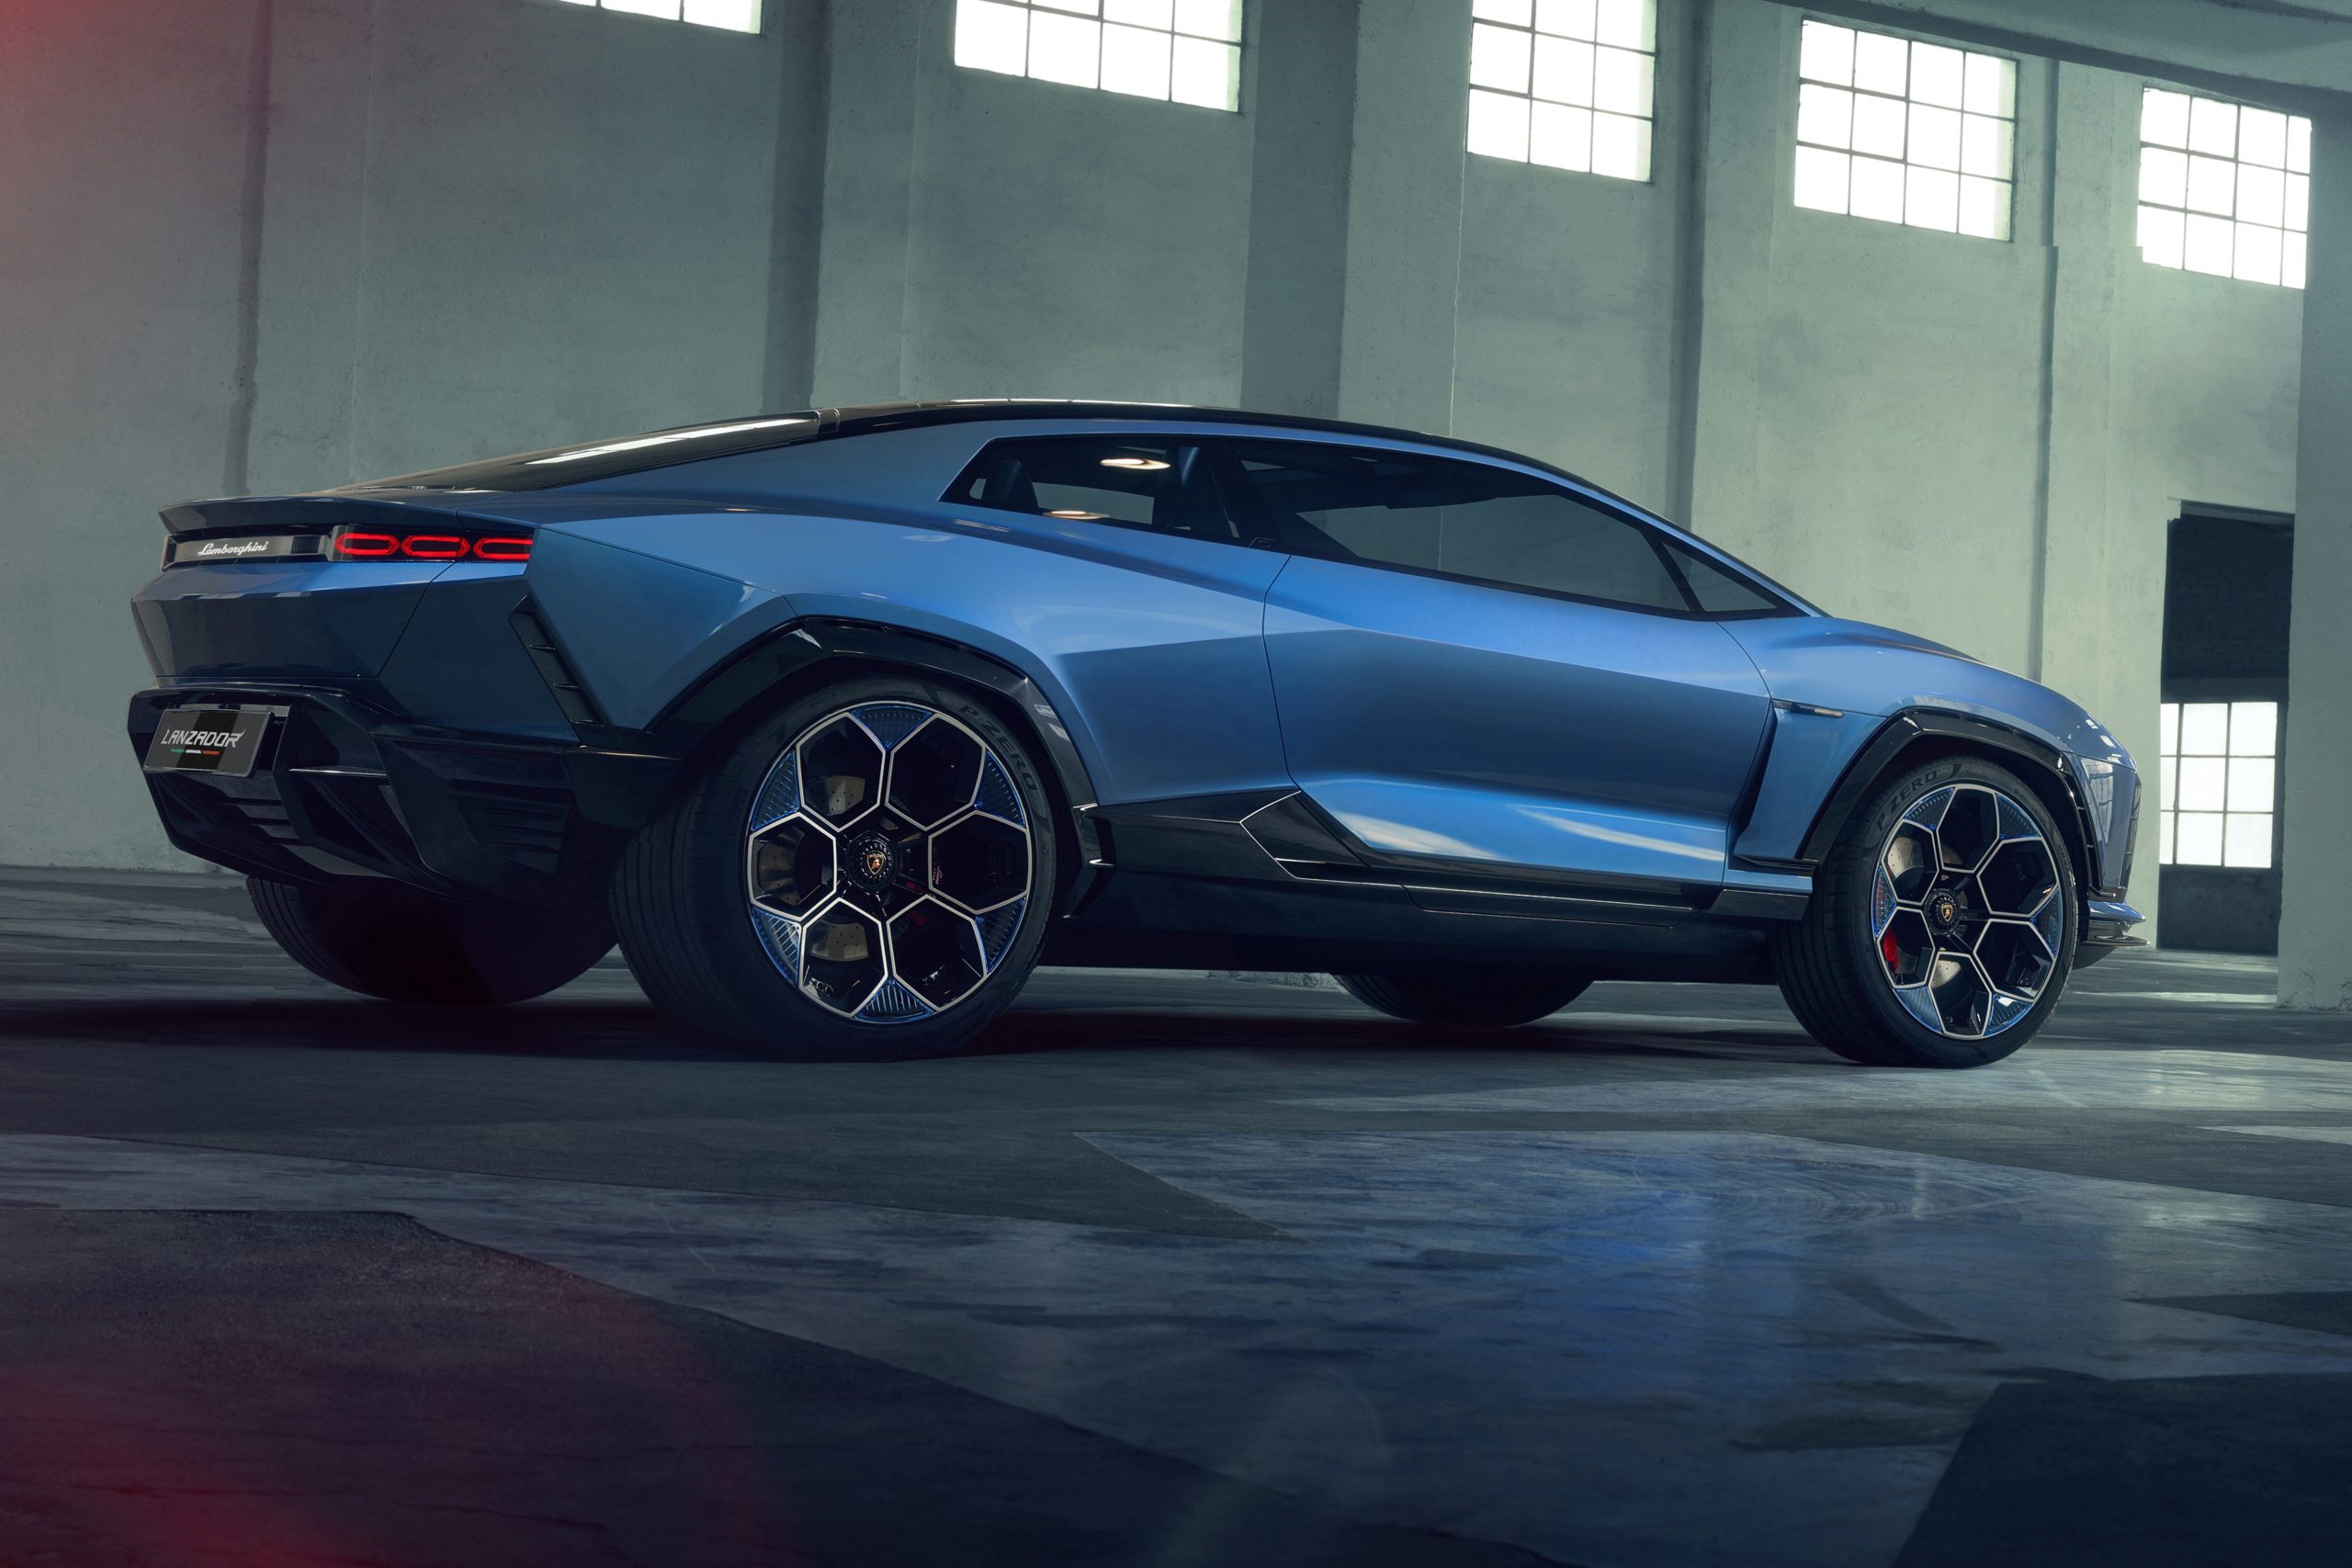 lamborghini reveals its first electric car, a four-door ultra-gt with over 1,300bhp